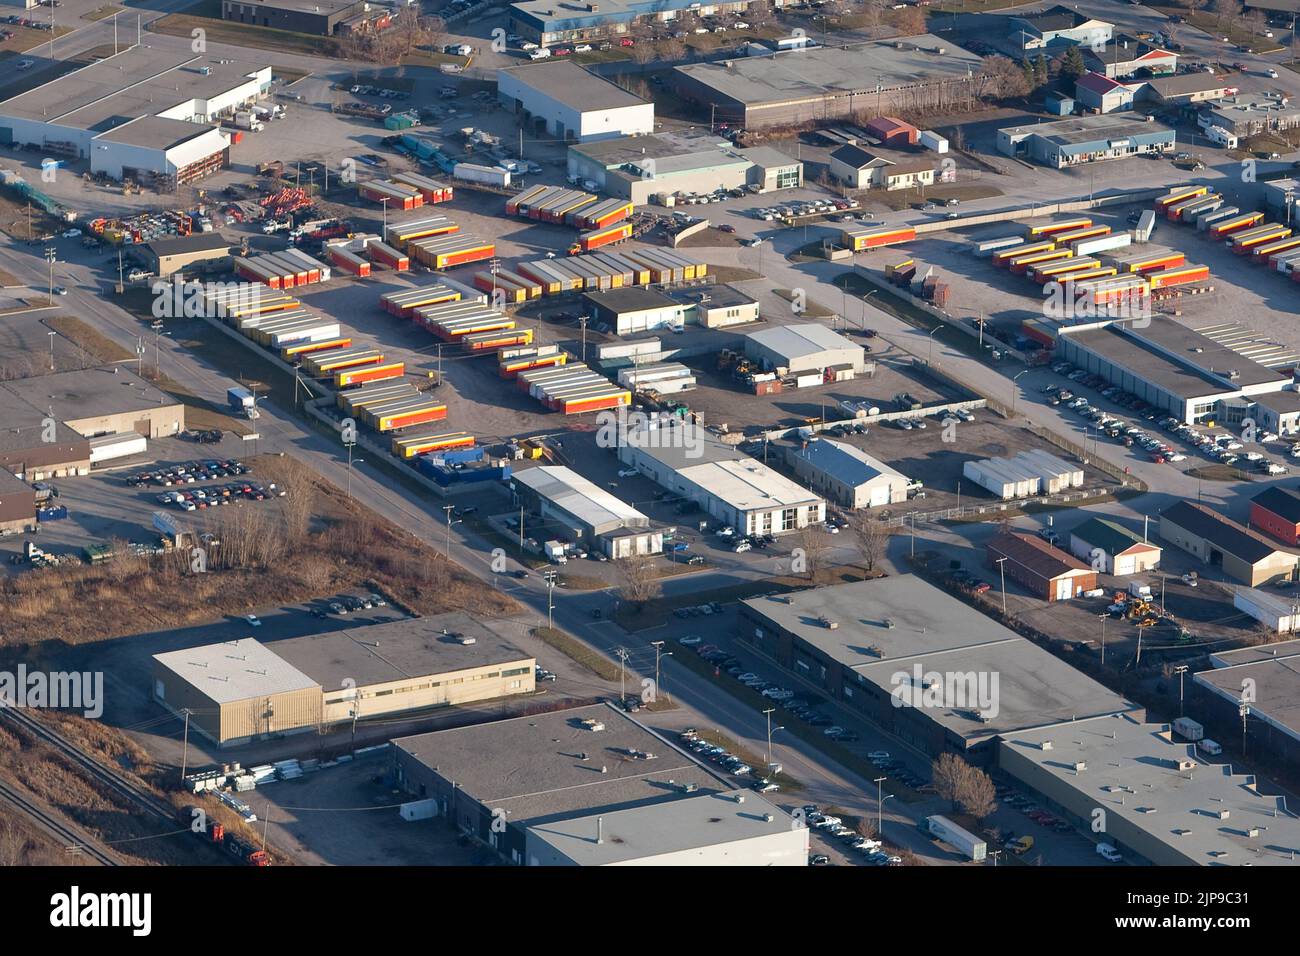 Parc industriel St-Malo industrial park in Quebec city is pictured in this aerial photo November 11, 2009. Stock Photo